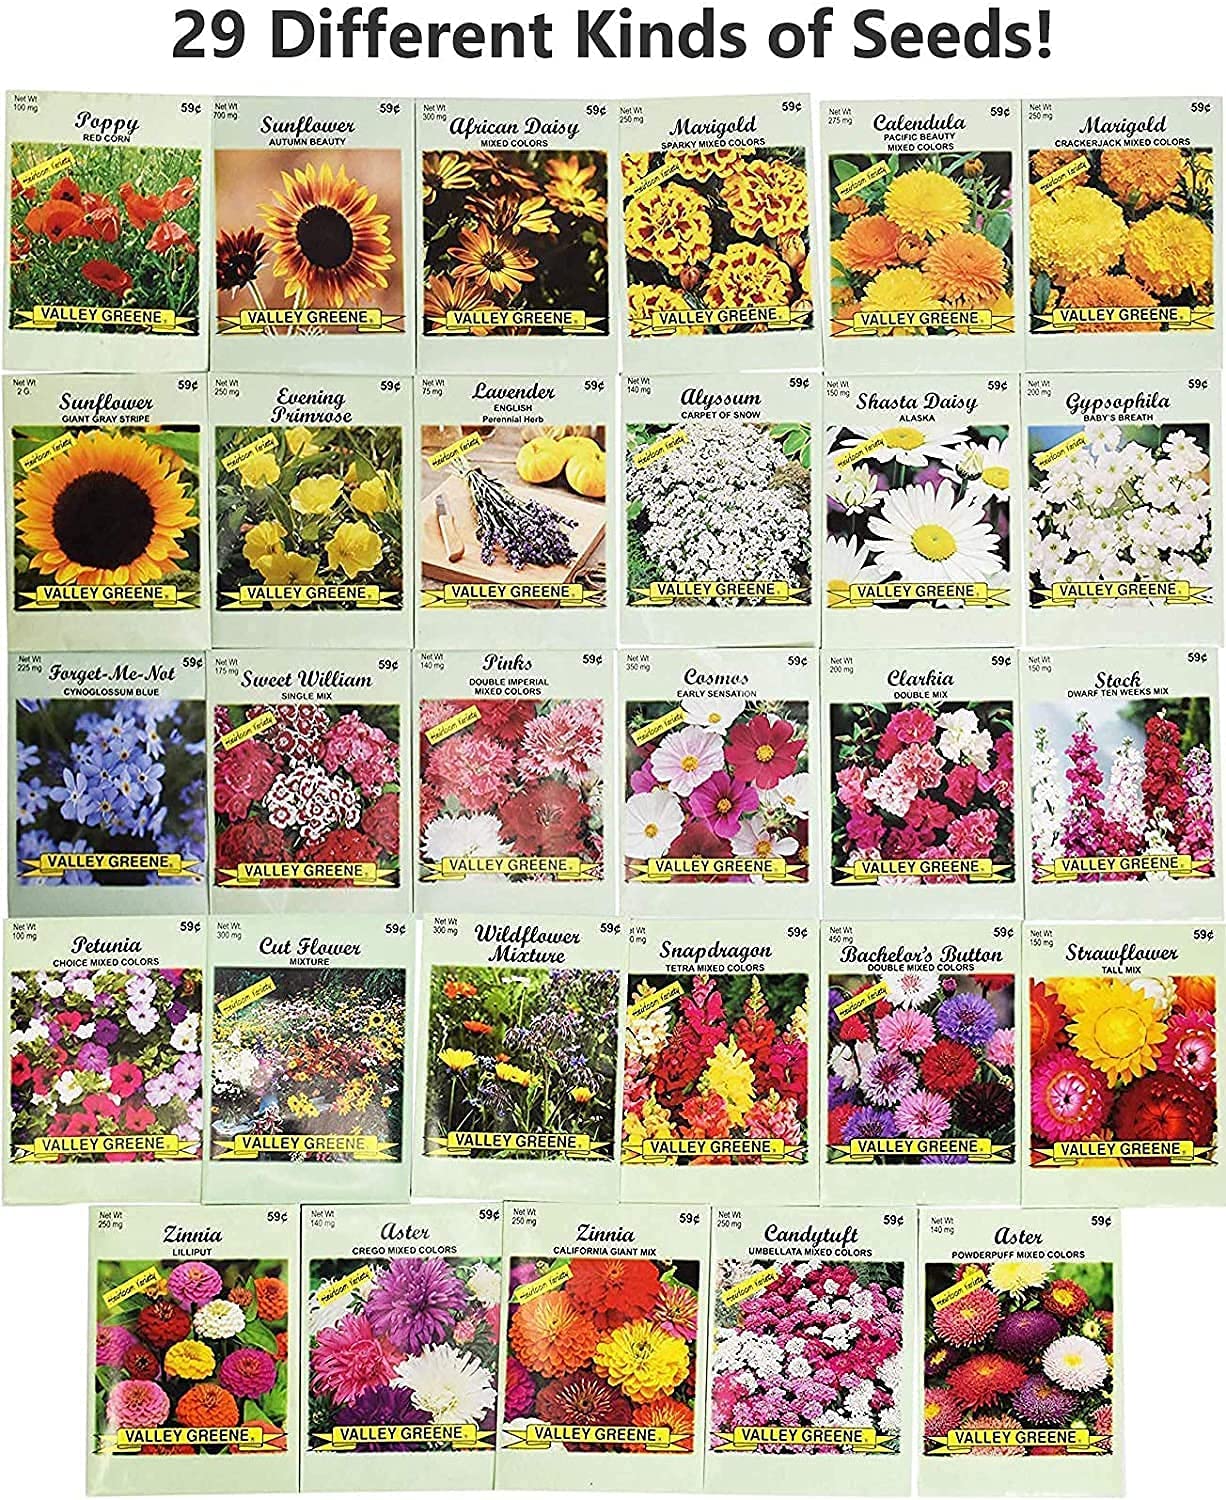 25 Slightly Assorted Flower Seed Packets - Includes 10+ Varieties - May Include: Forget Me Nots, Pinks, Marigolds, Zinnia, Wildflower, Poppy, Snapdragon and More - Made in the USA